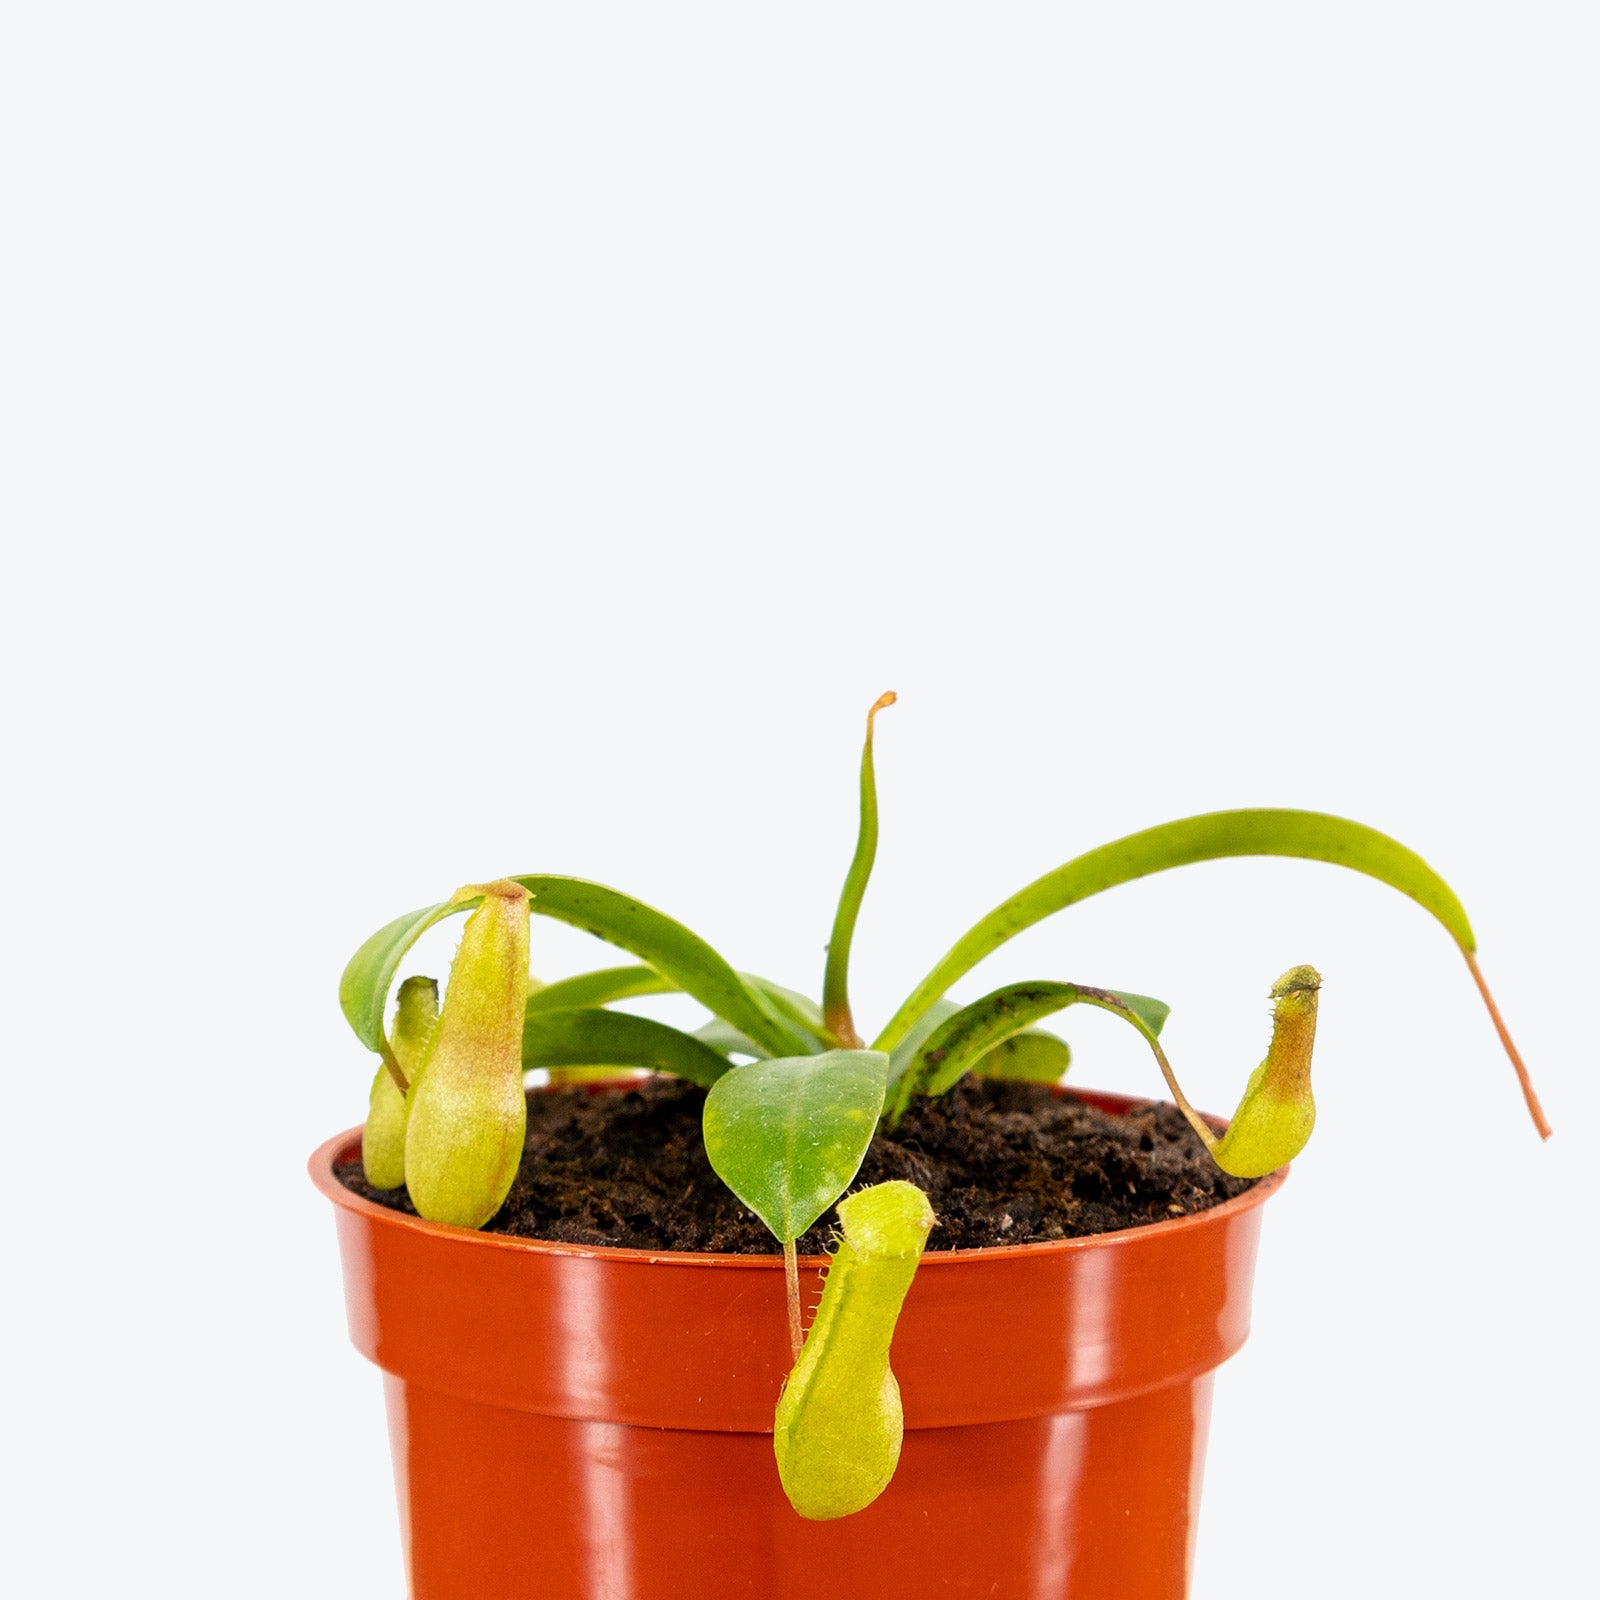 Nepenthes Pitcher Plant | Care Guide and Pro Tips - Delivery from Toronto across Canada - JOMO Studio